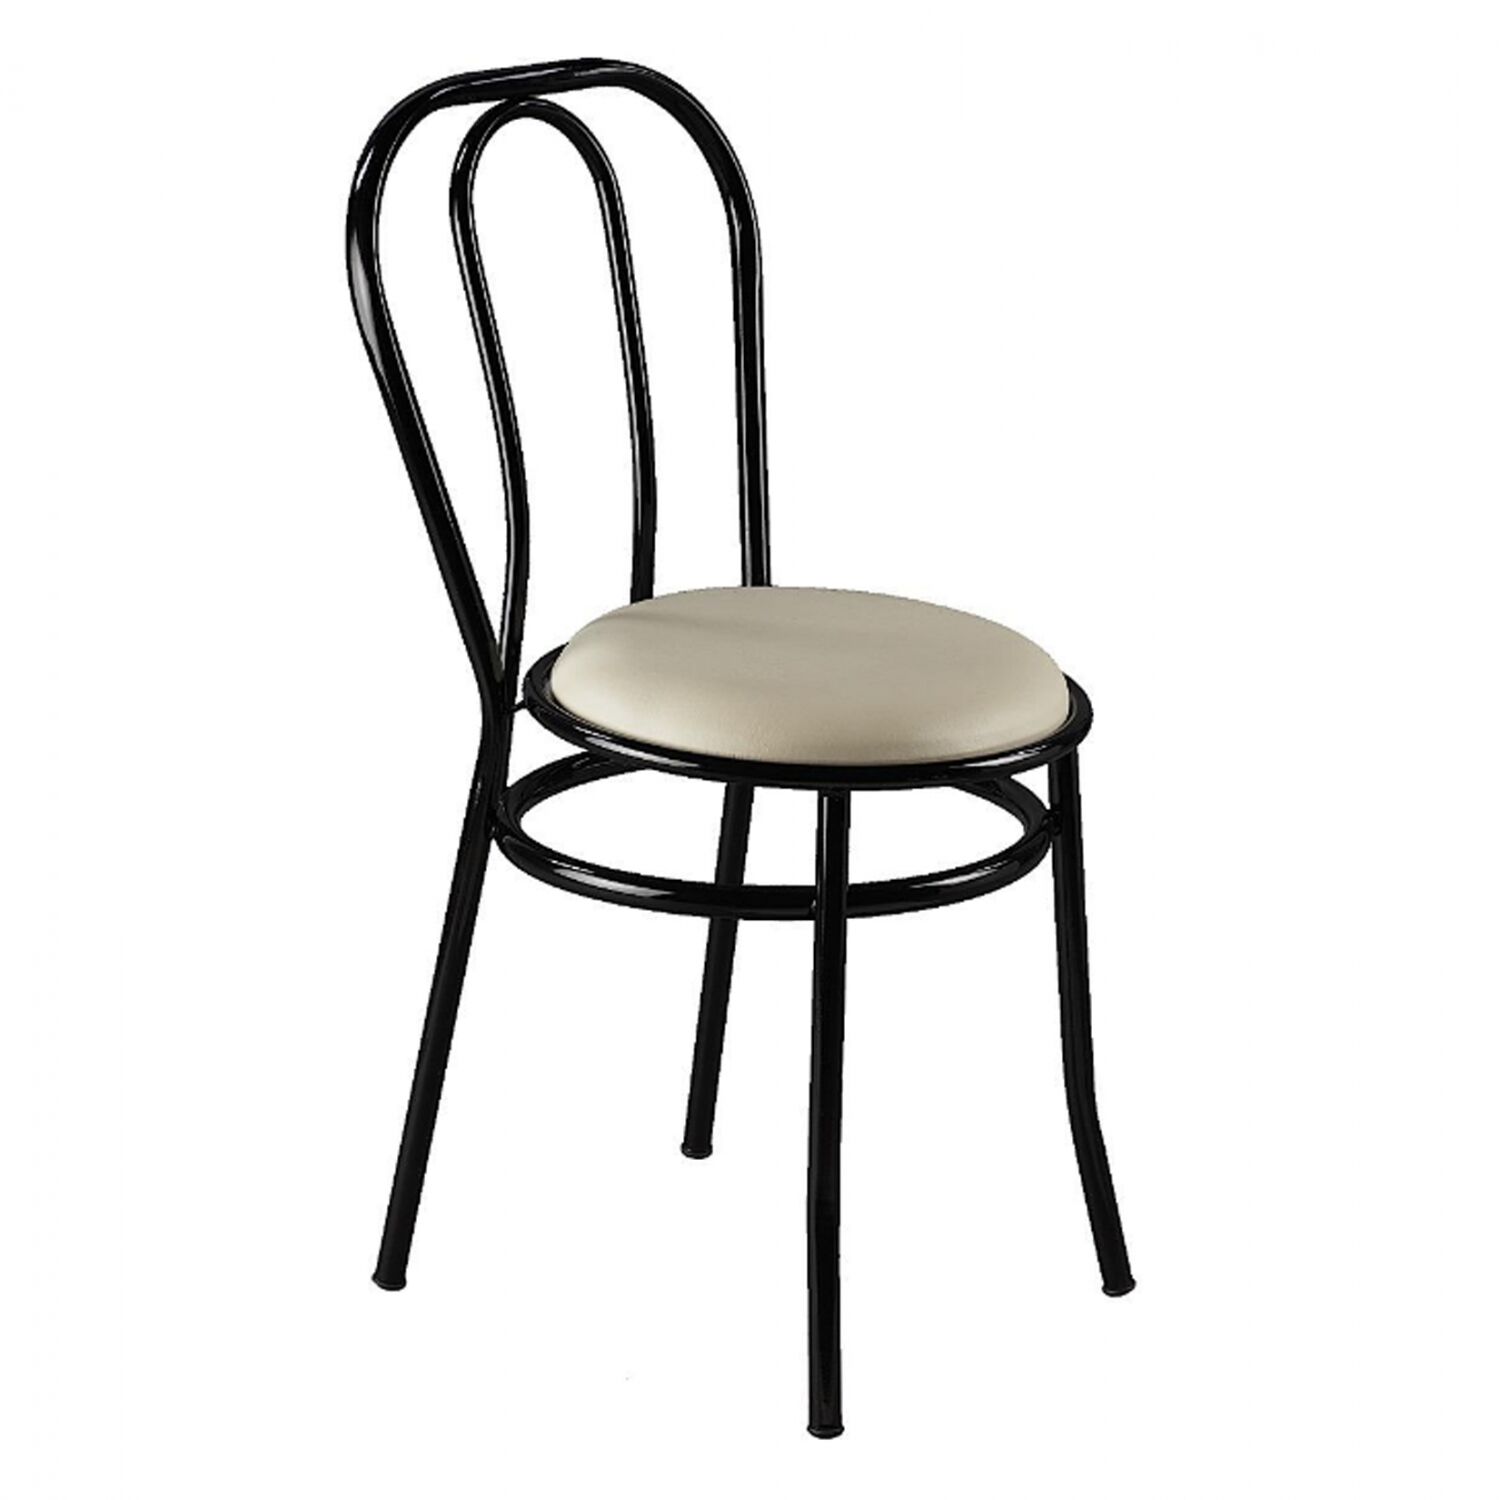 Chair Vienna type with PU